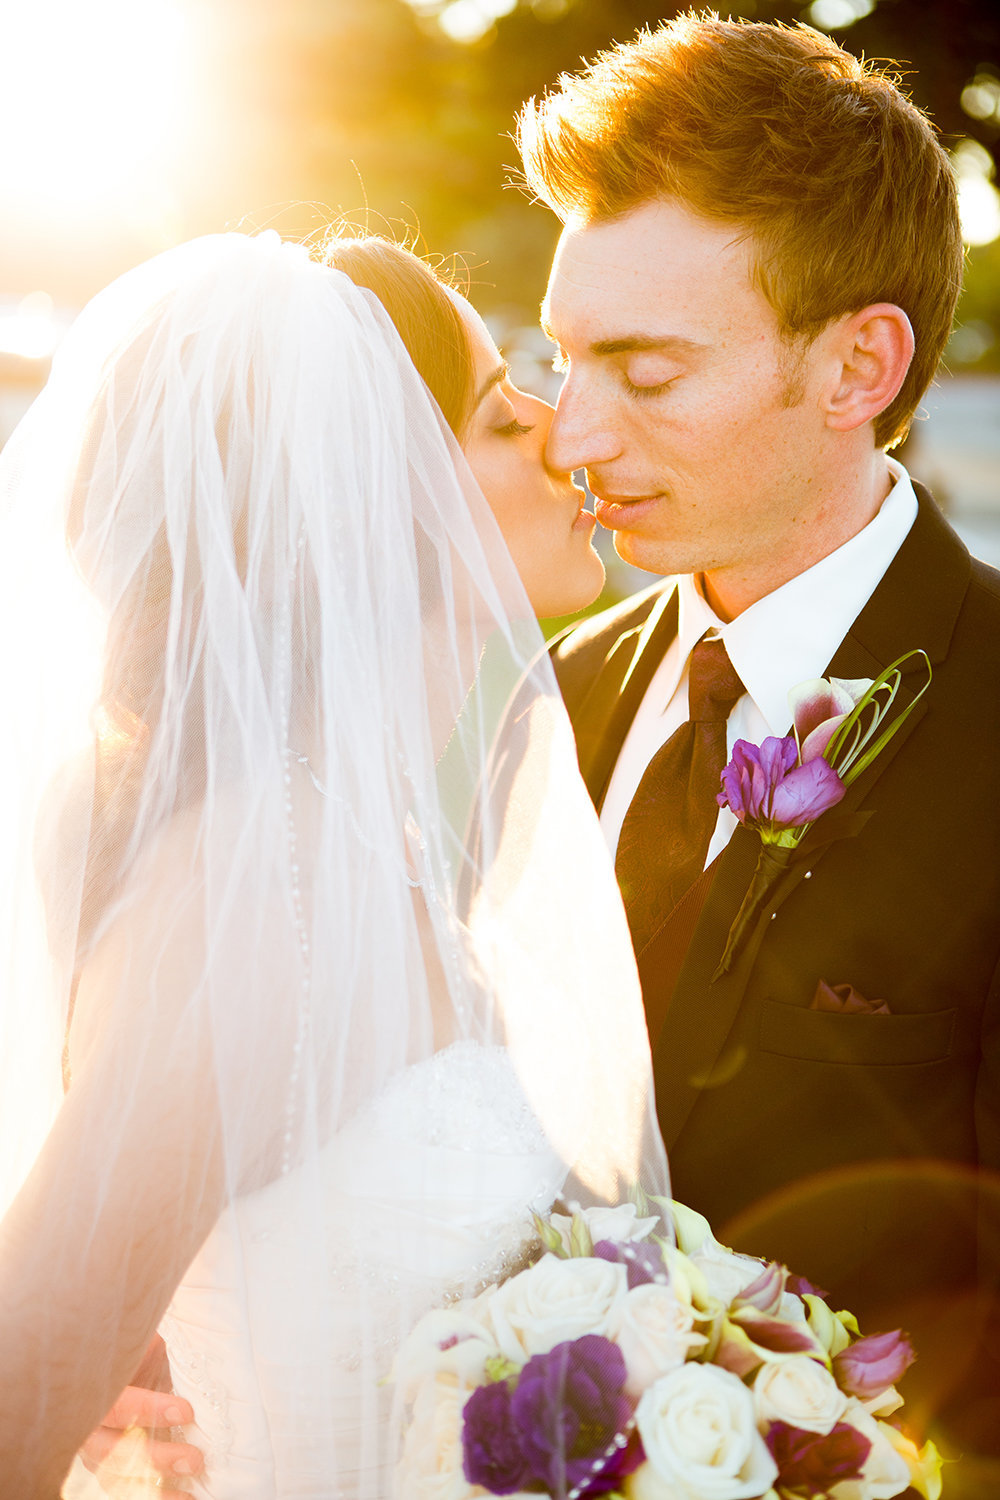 Lovely lighting in a candid portrait of bride and groom